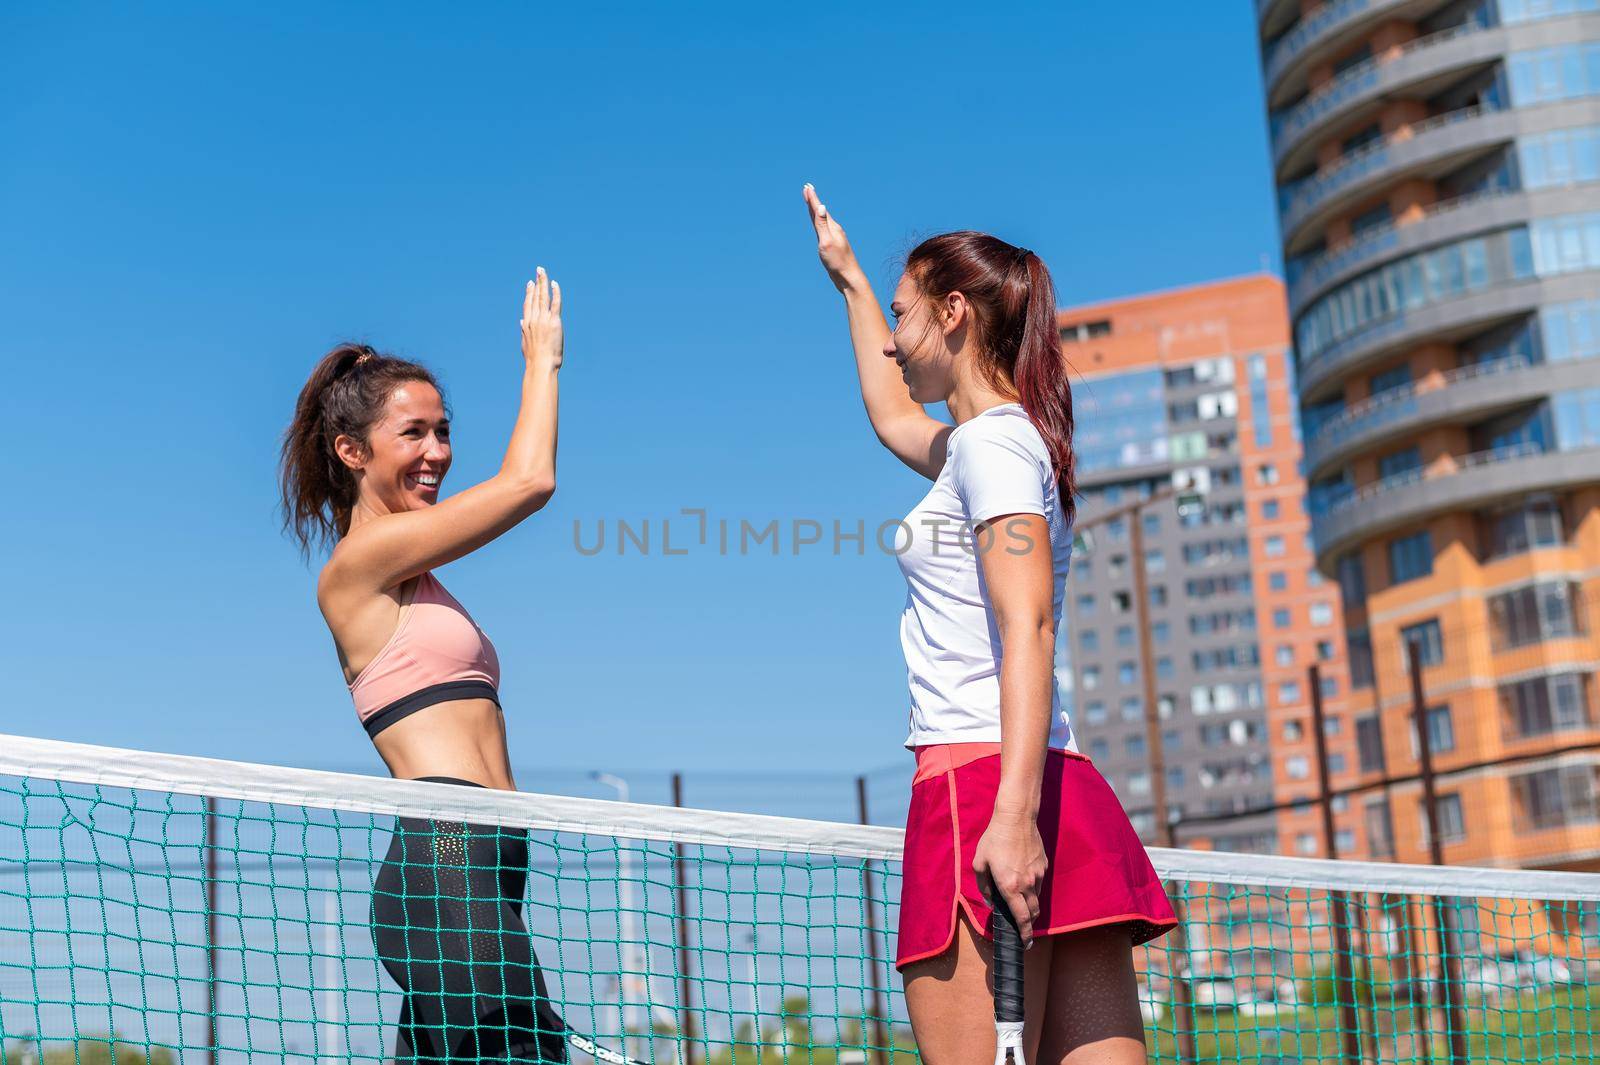 Two Caucasian women in sportswear greeting before a tennis match on an outdoor court. Players give a high five before the game. by mrwed54